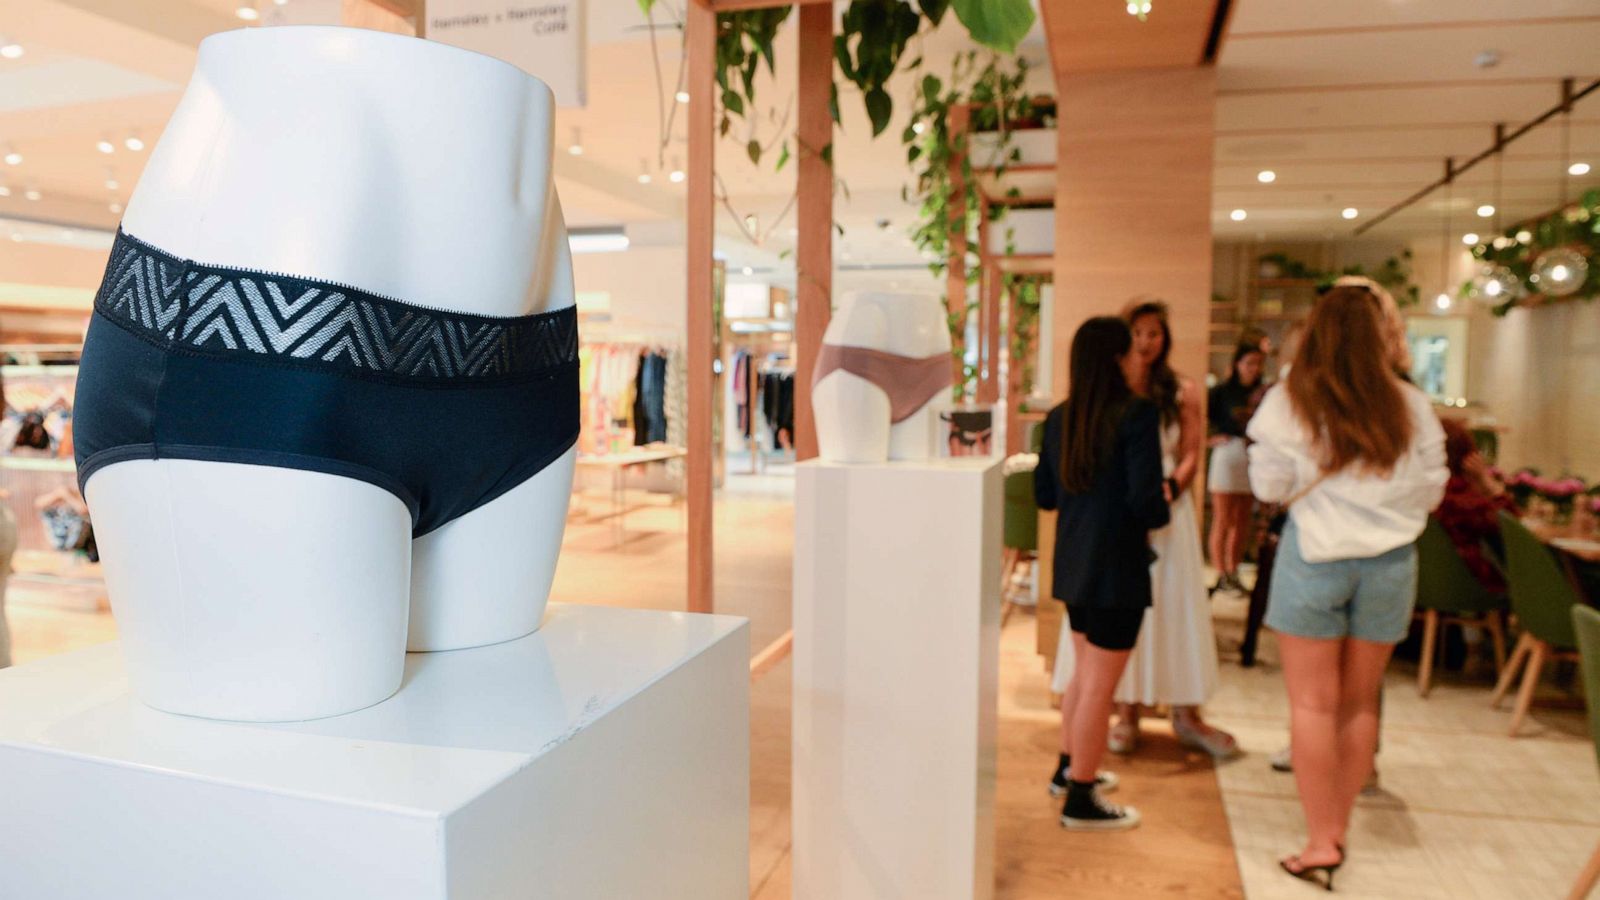 The Ultimate Guide to Teen Thinx Period Underwear